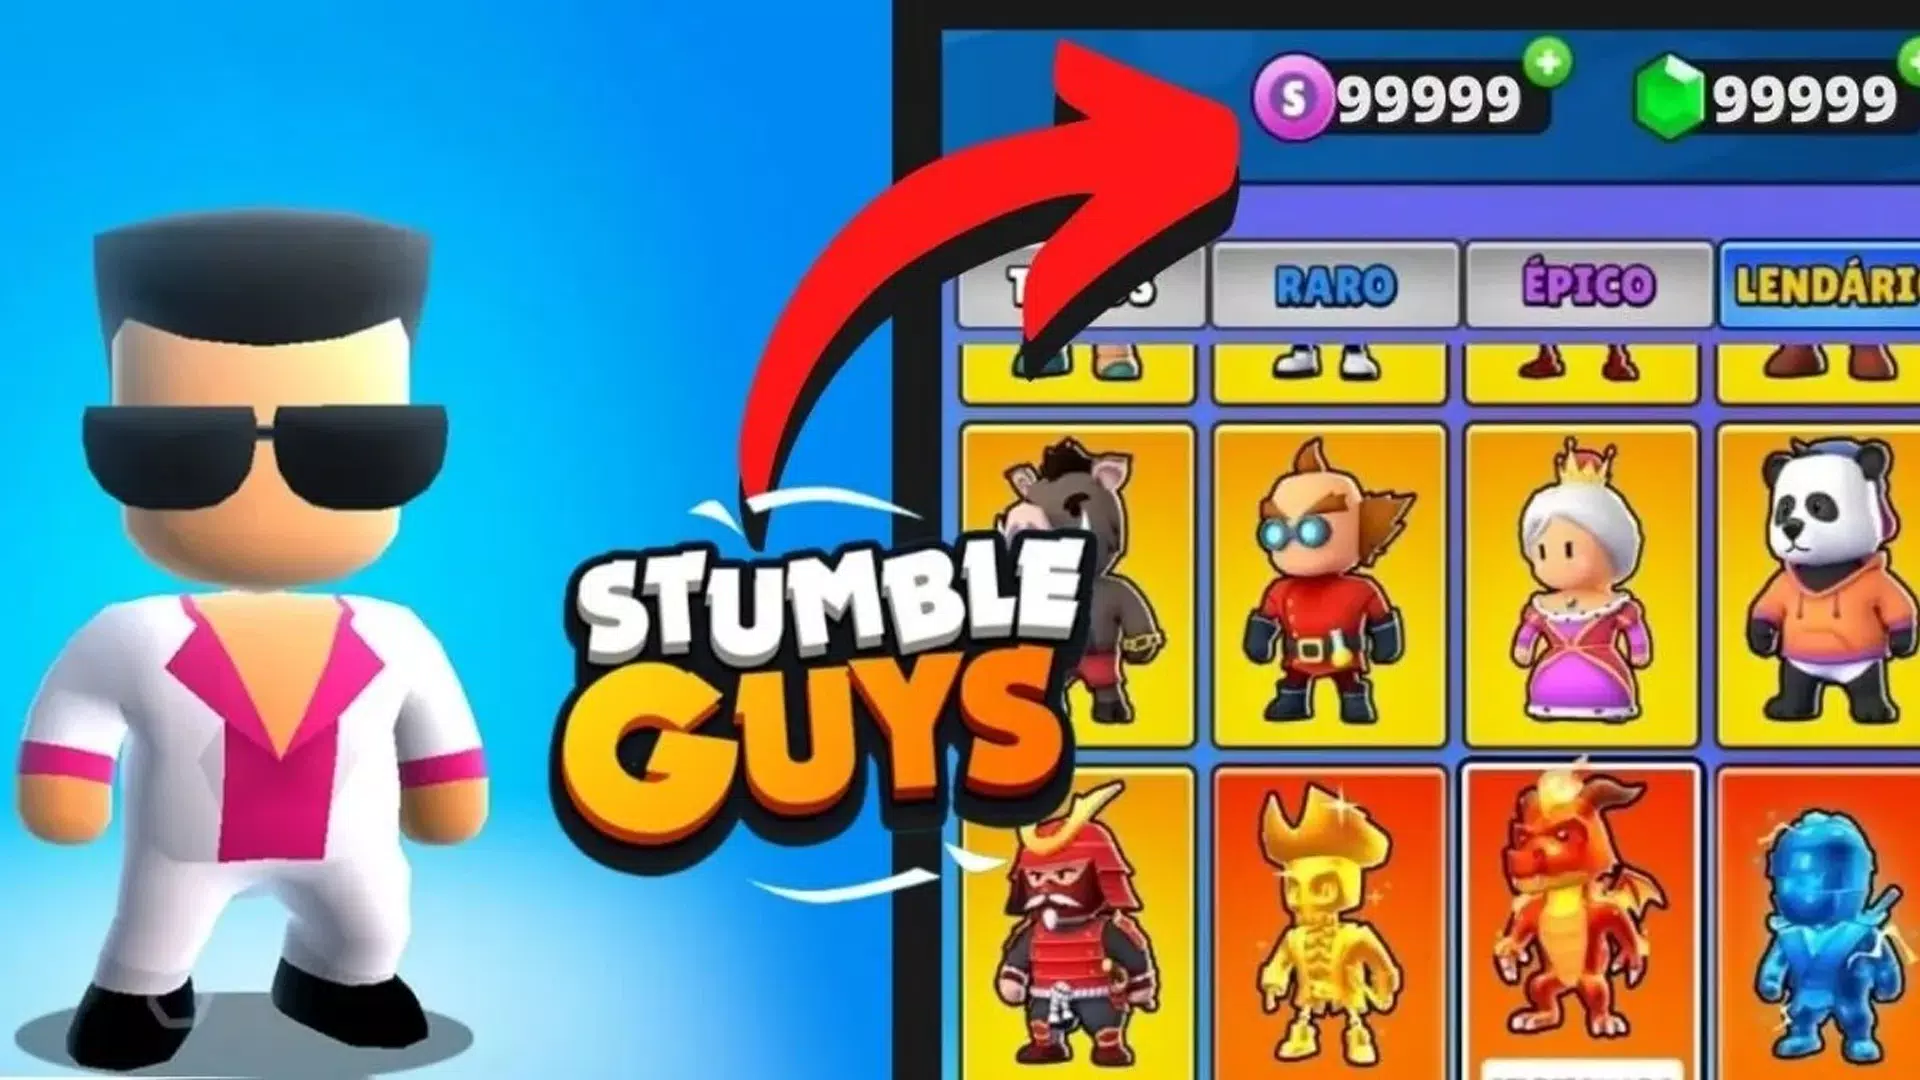 mods to get all skins in stumble guys｜TikTok Search